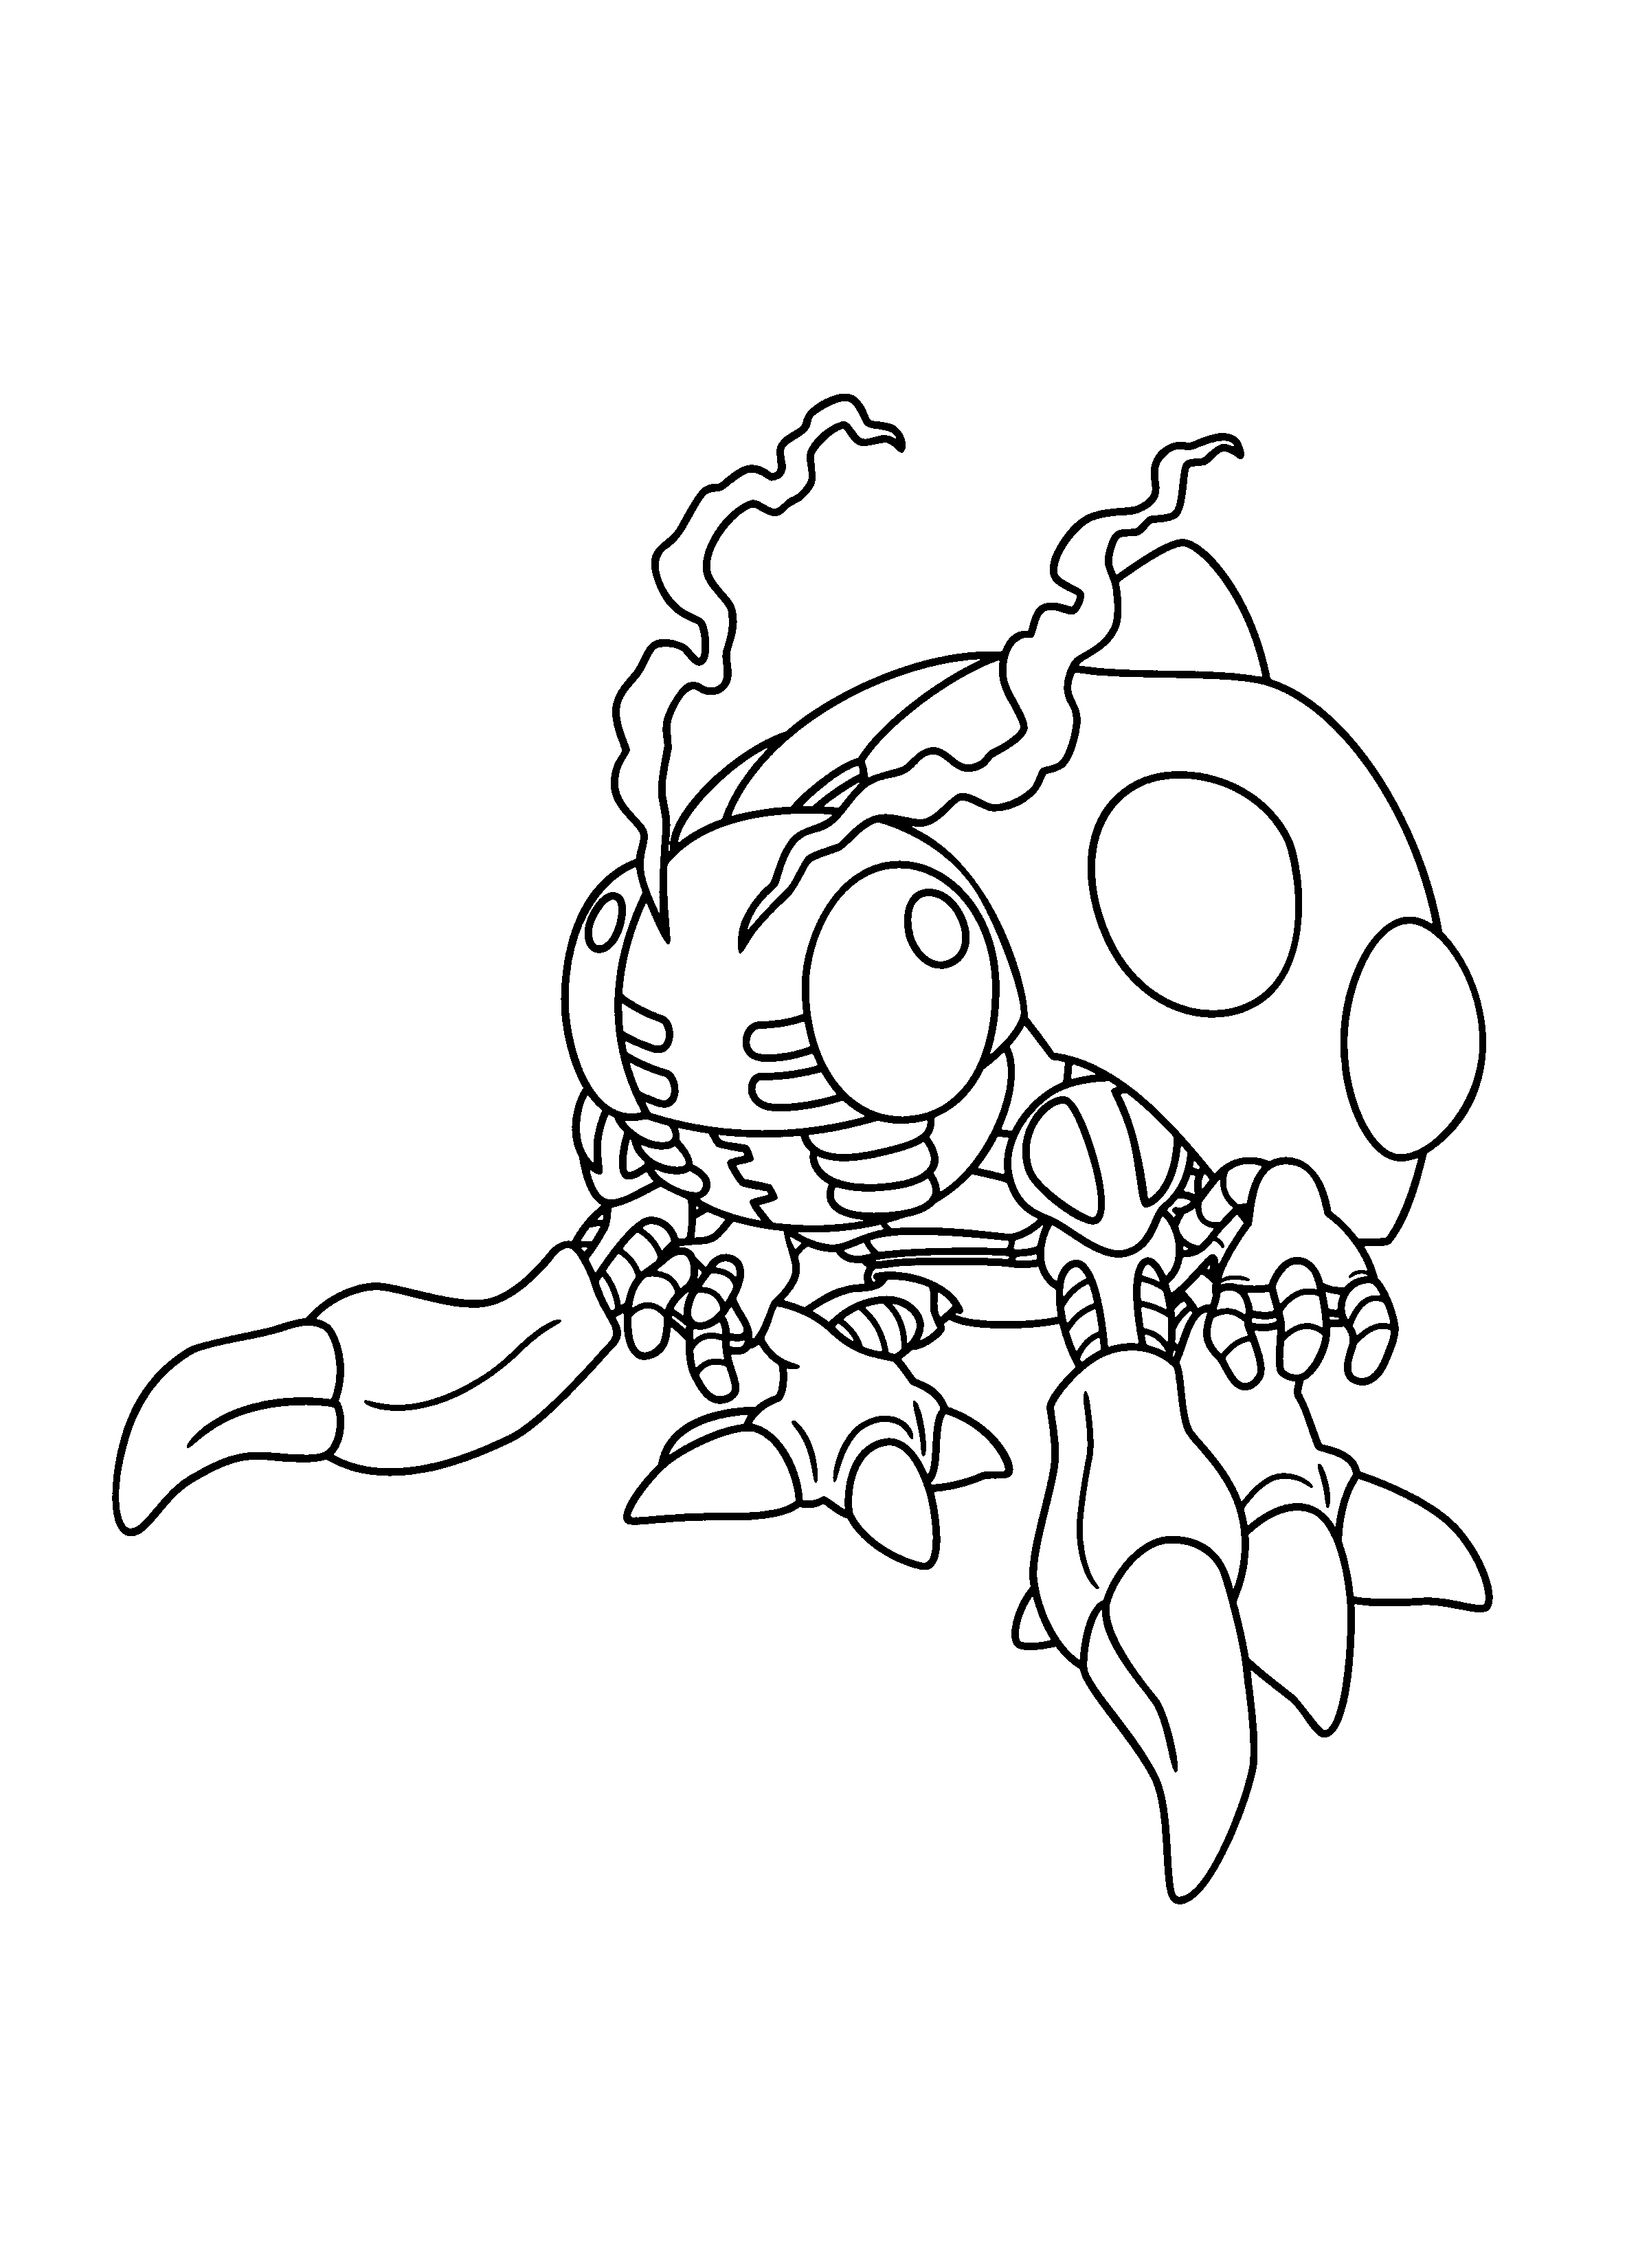 Digimon 34 (Cartoons) Printable coloring pages